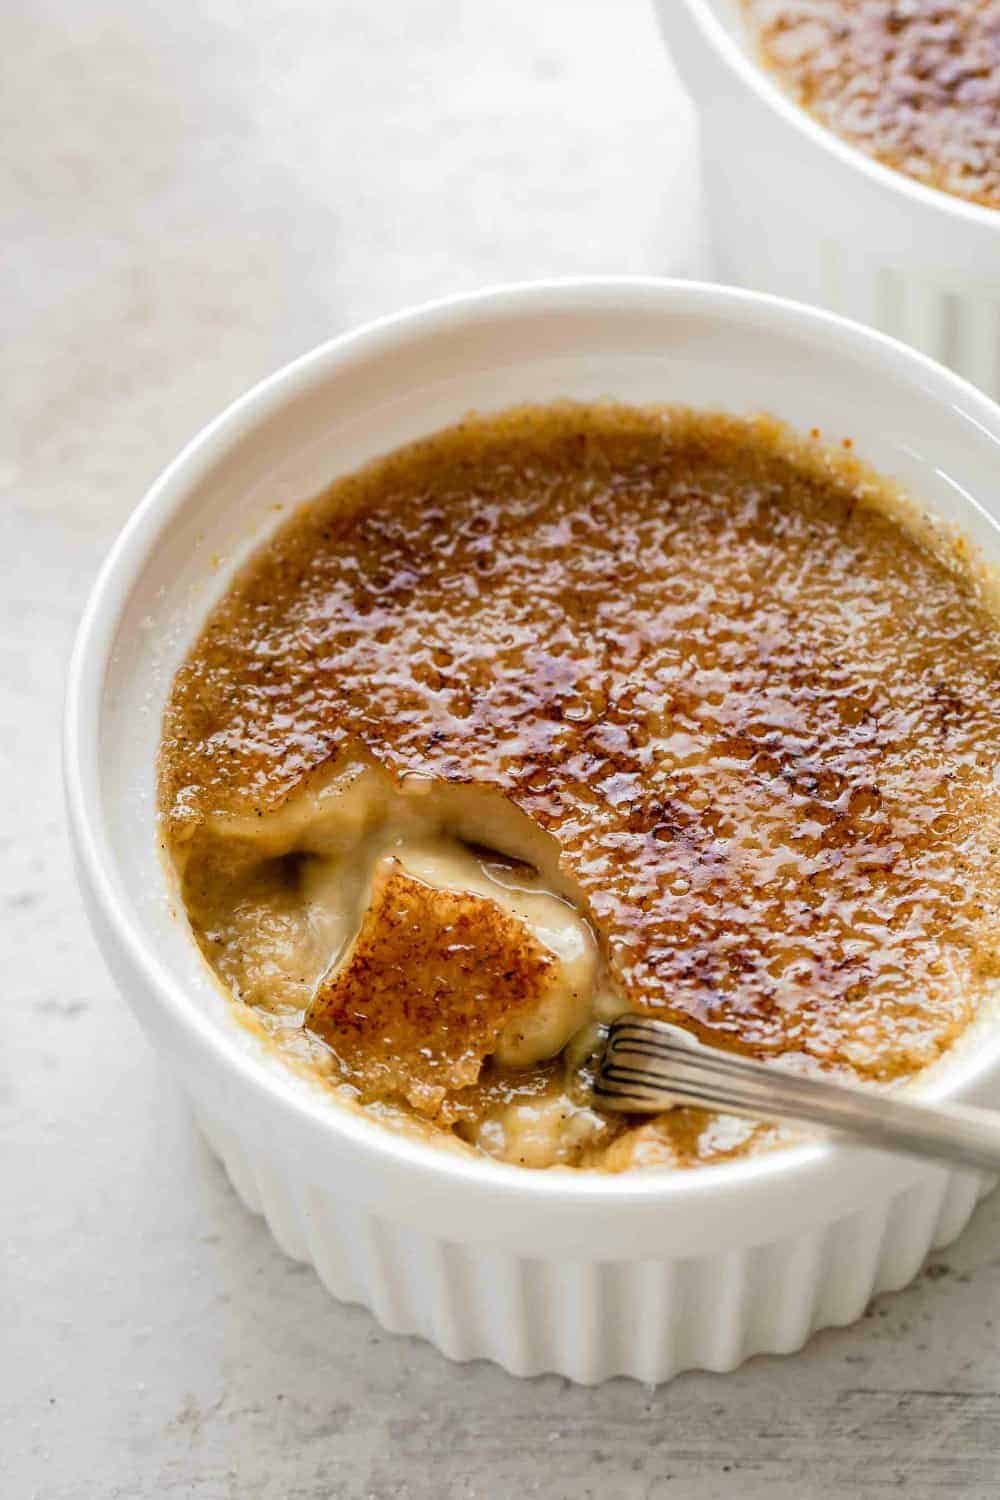 Close up of a spoon breaking into the crackly sugar topping on a pumpkin creme brulee